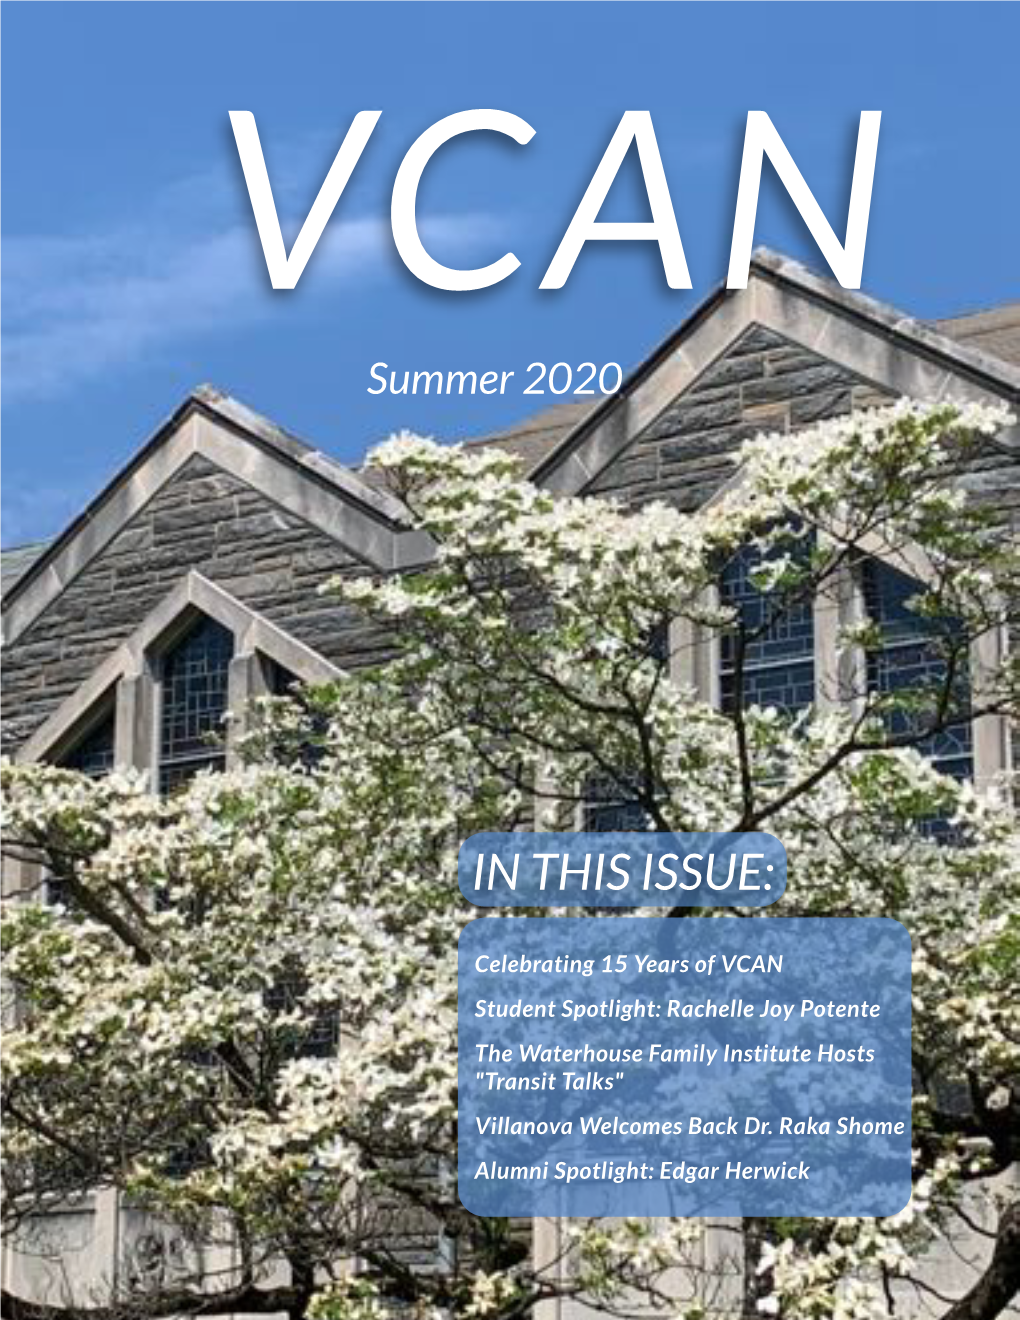 VCAN Summer 2020 in THIS ISSUE